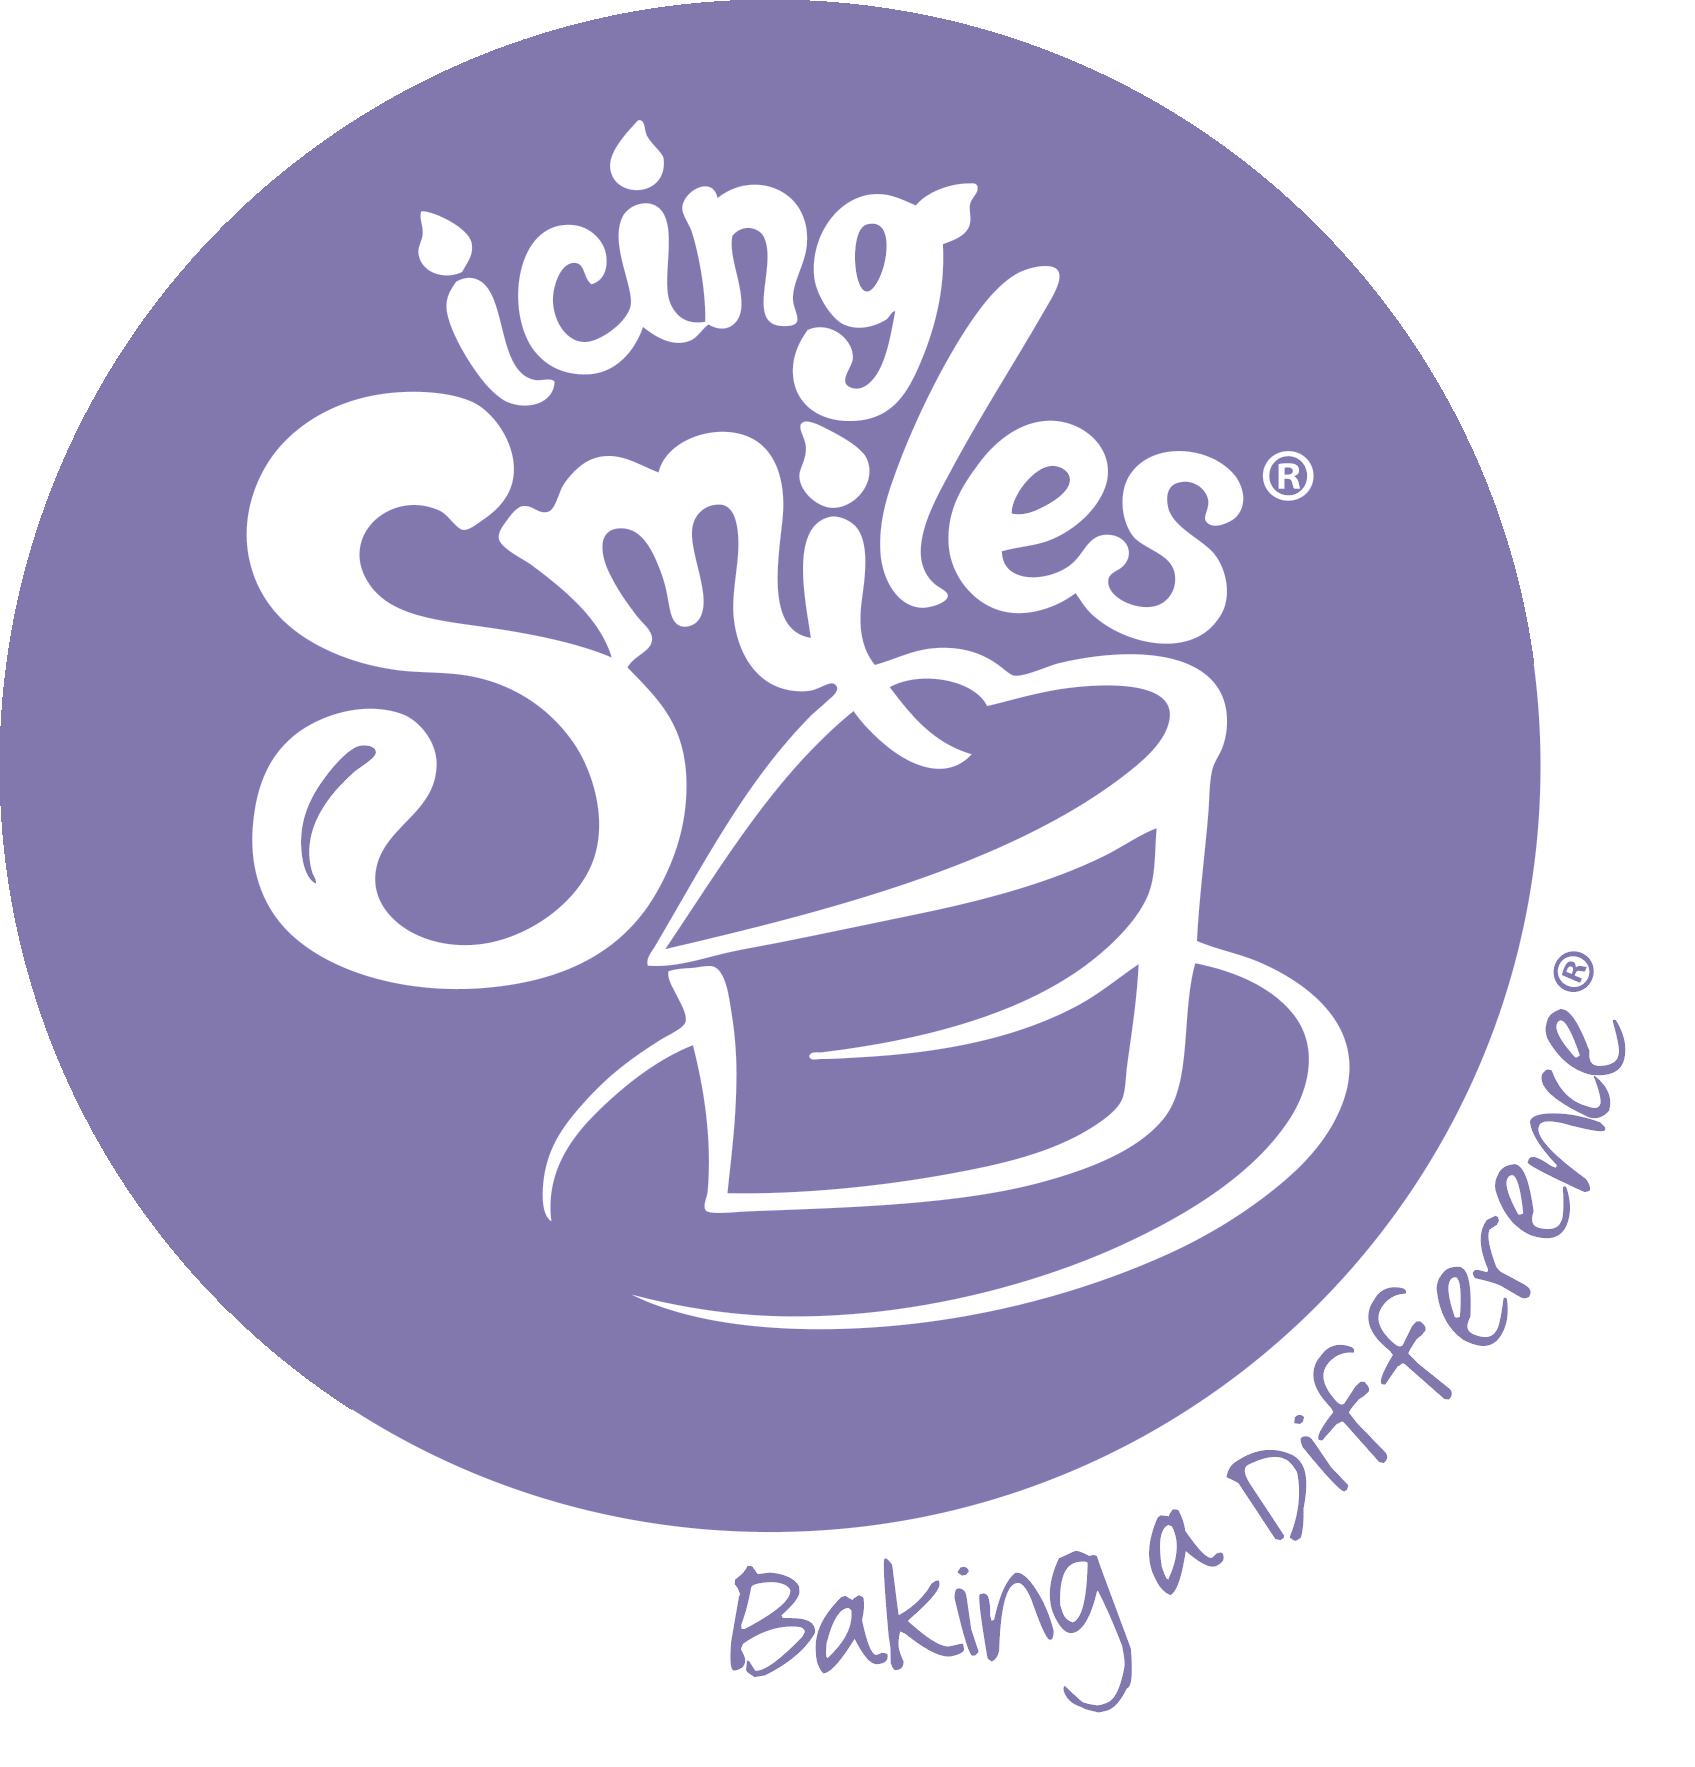 Icing Logo - About Us - We are Baking a Difference